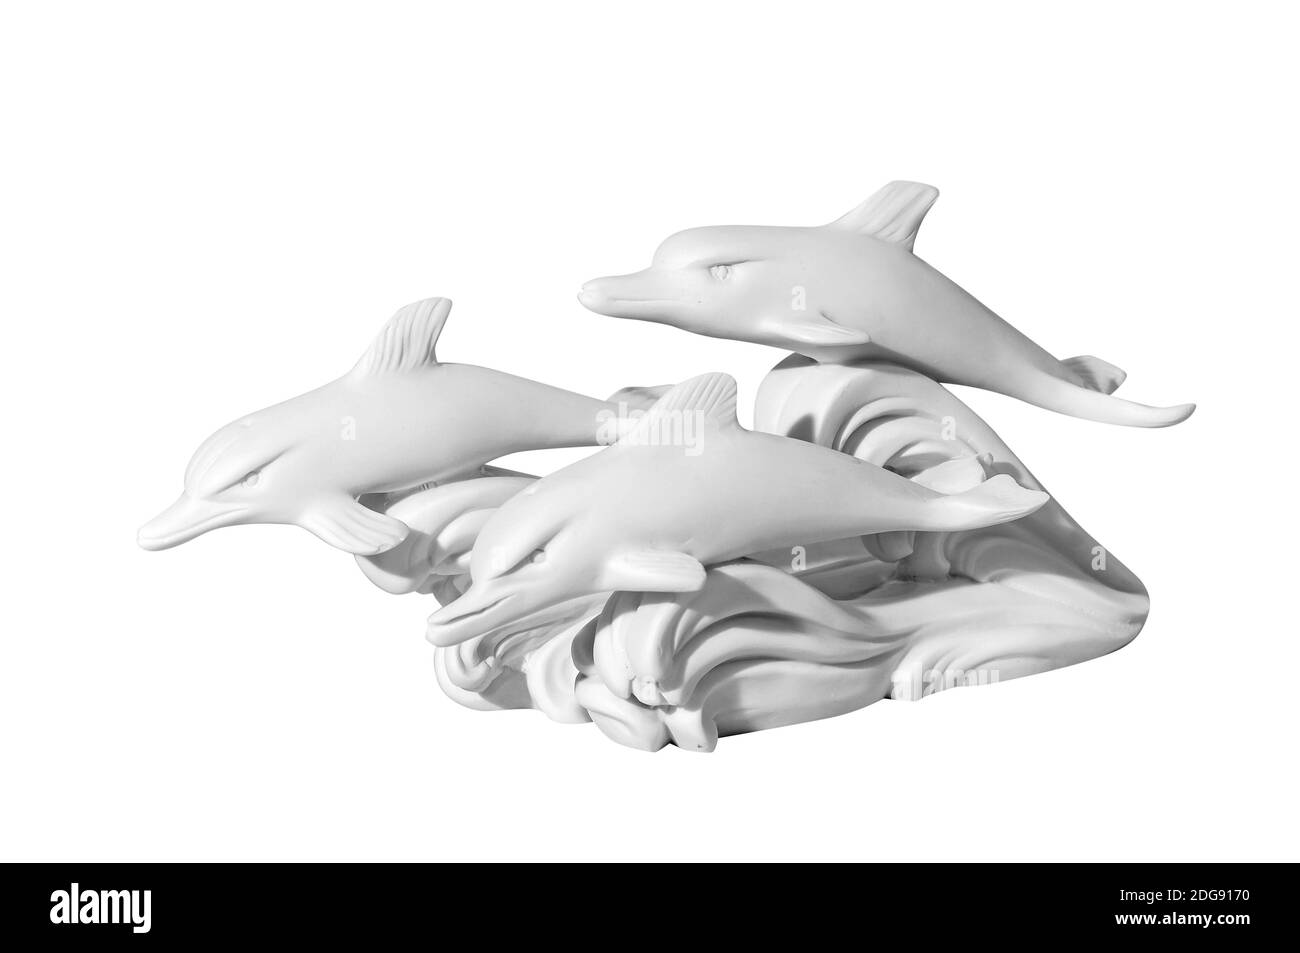 Statue of dolphins on a white background Stock Photo